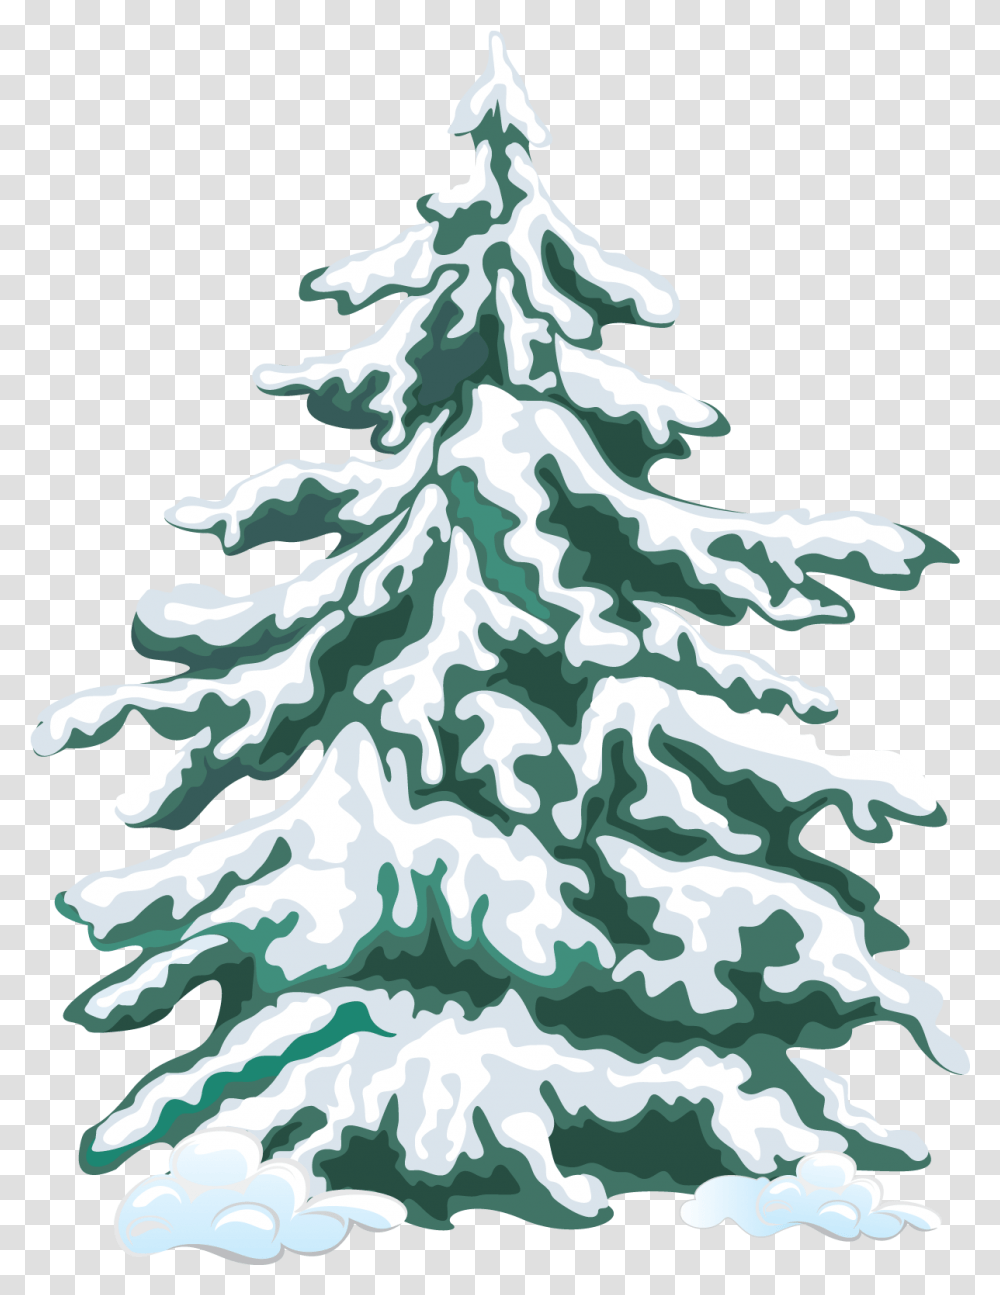 Library Of Evergreen Tree With Snow Jpg Christmas Tree Vector Snow, Plant, Ornament, Pine, Rug Transparent Png